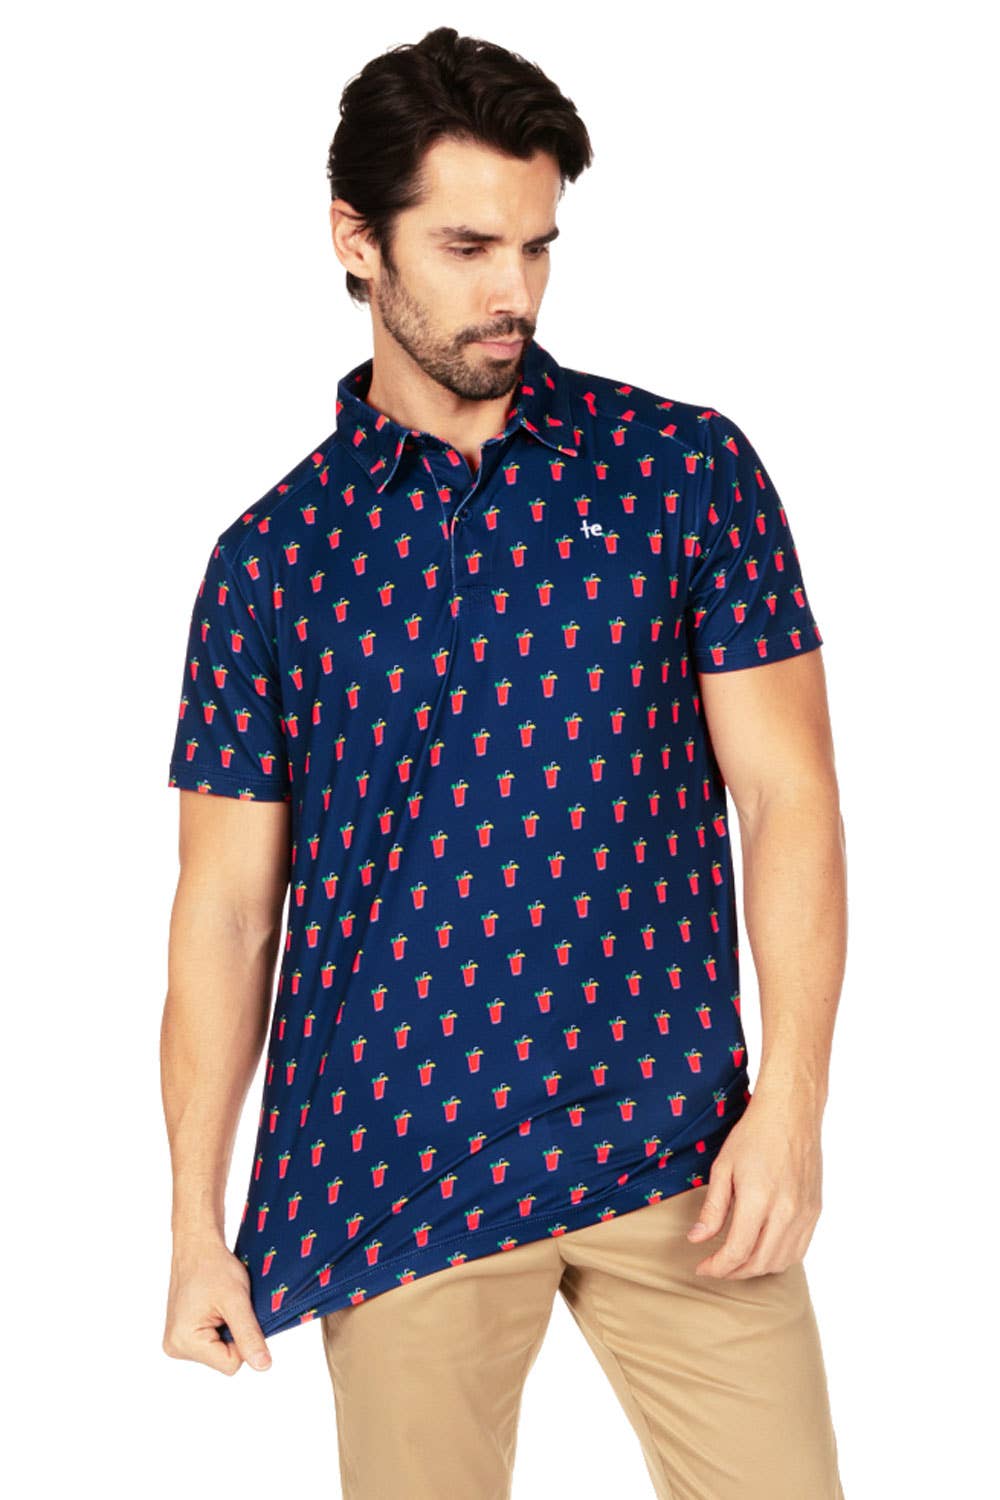 Tipsy Elves - Bloody Mary Golf Polo